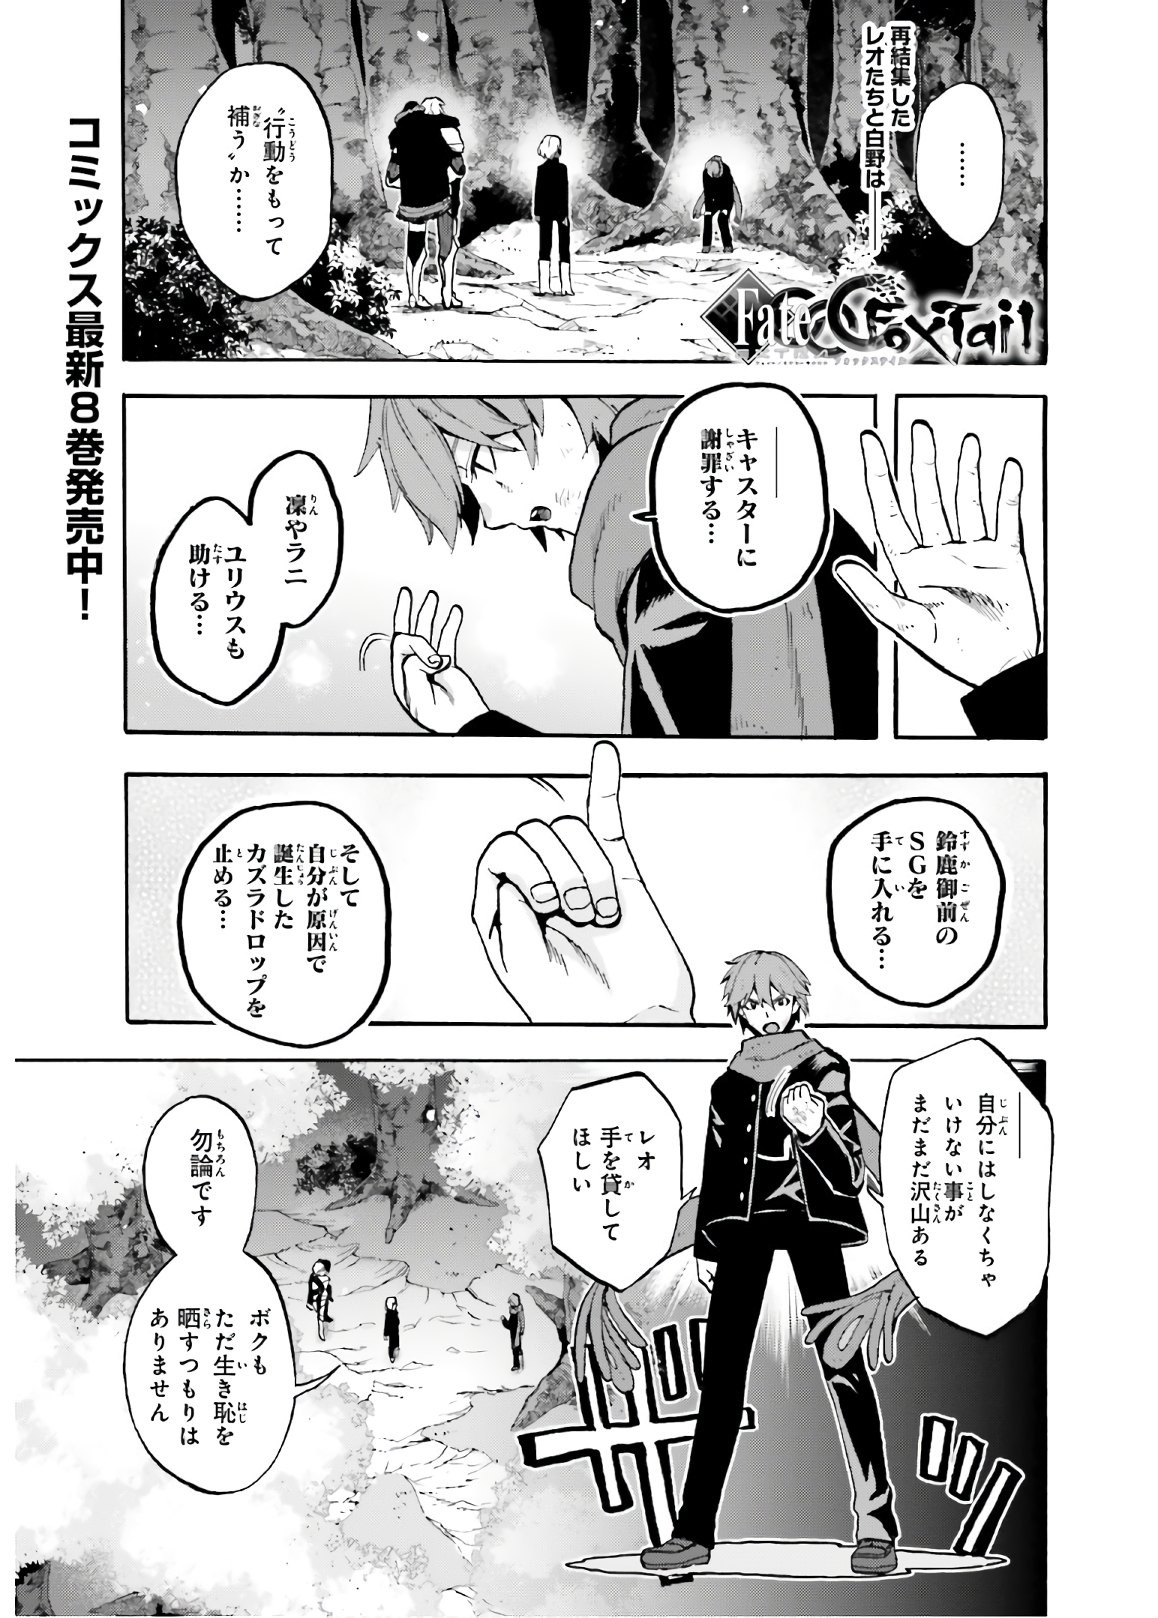 Fate Extra Ccc Fox Tail Chapter 60 5 Page 1 Raw Manga 生漫画